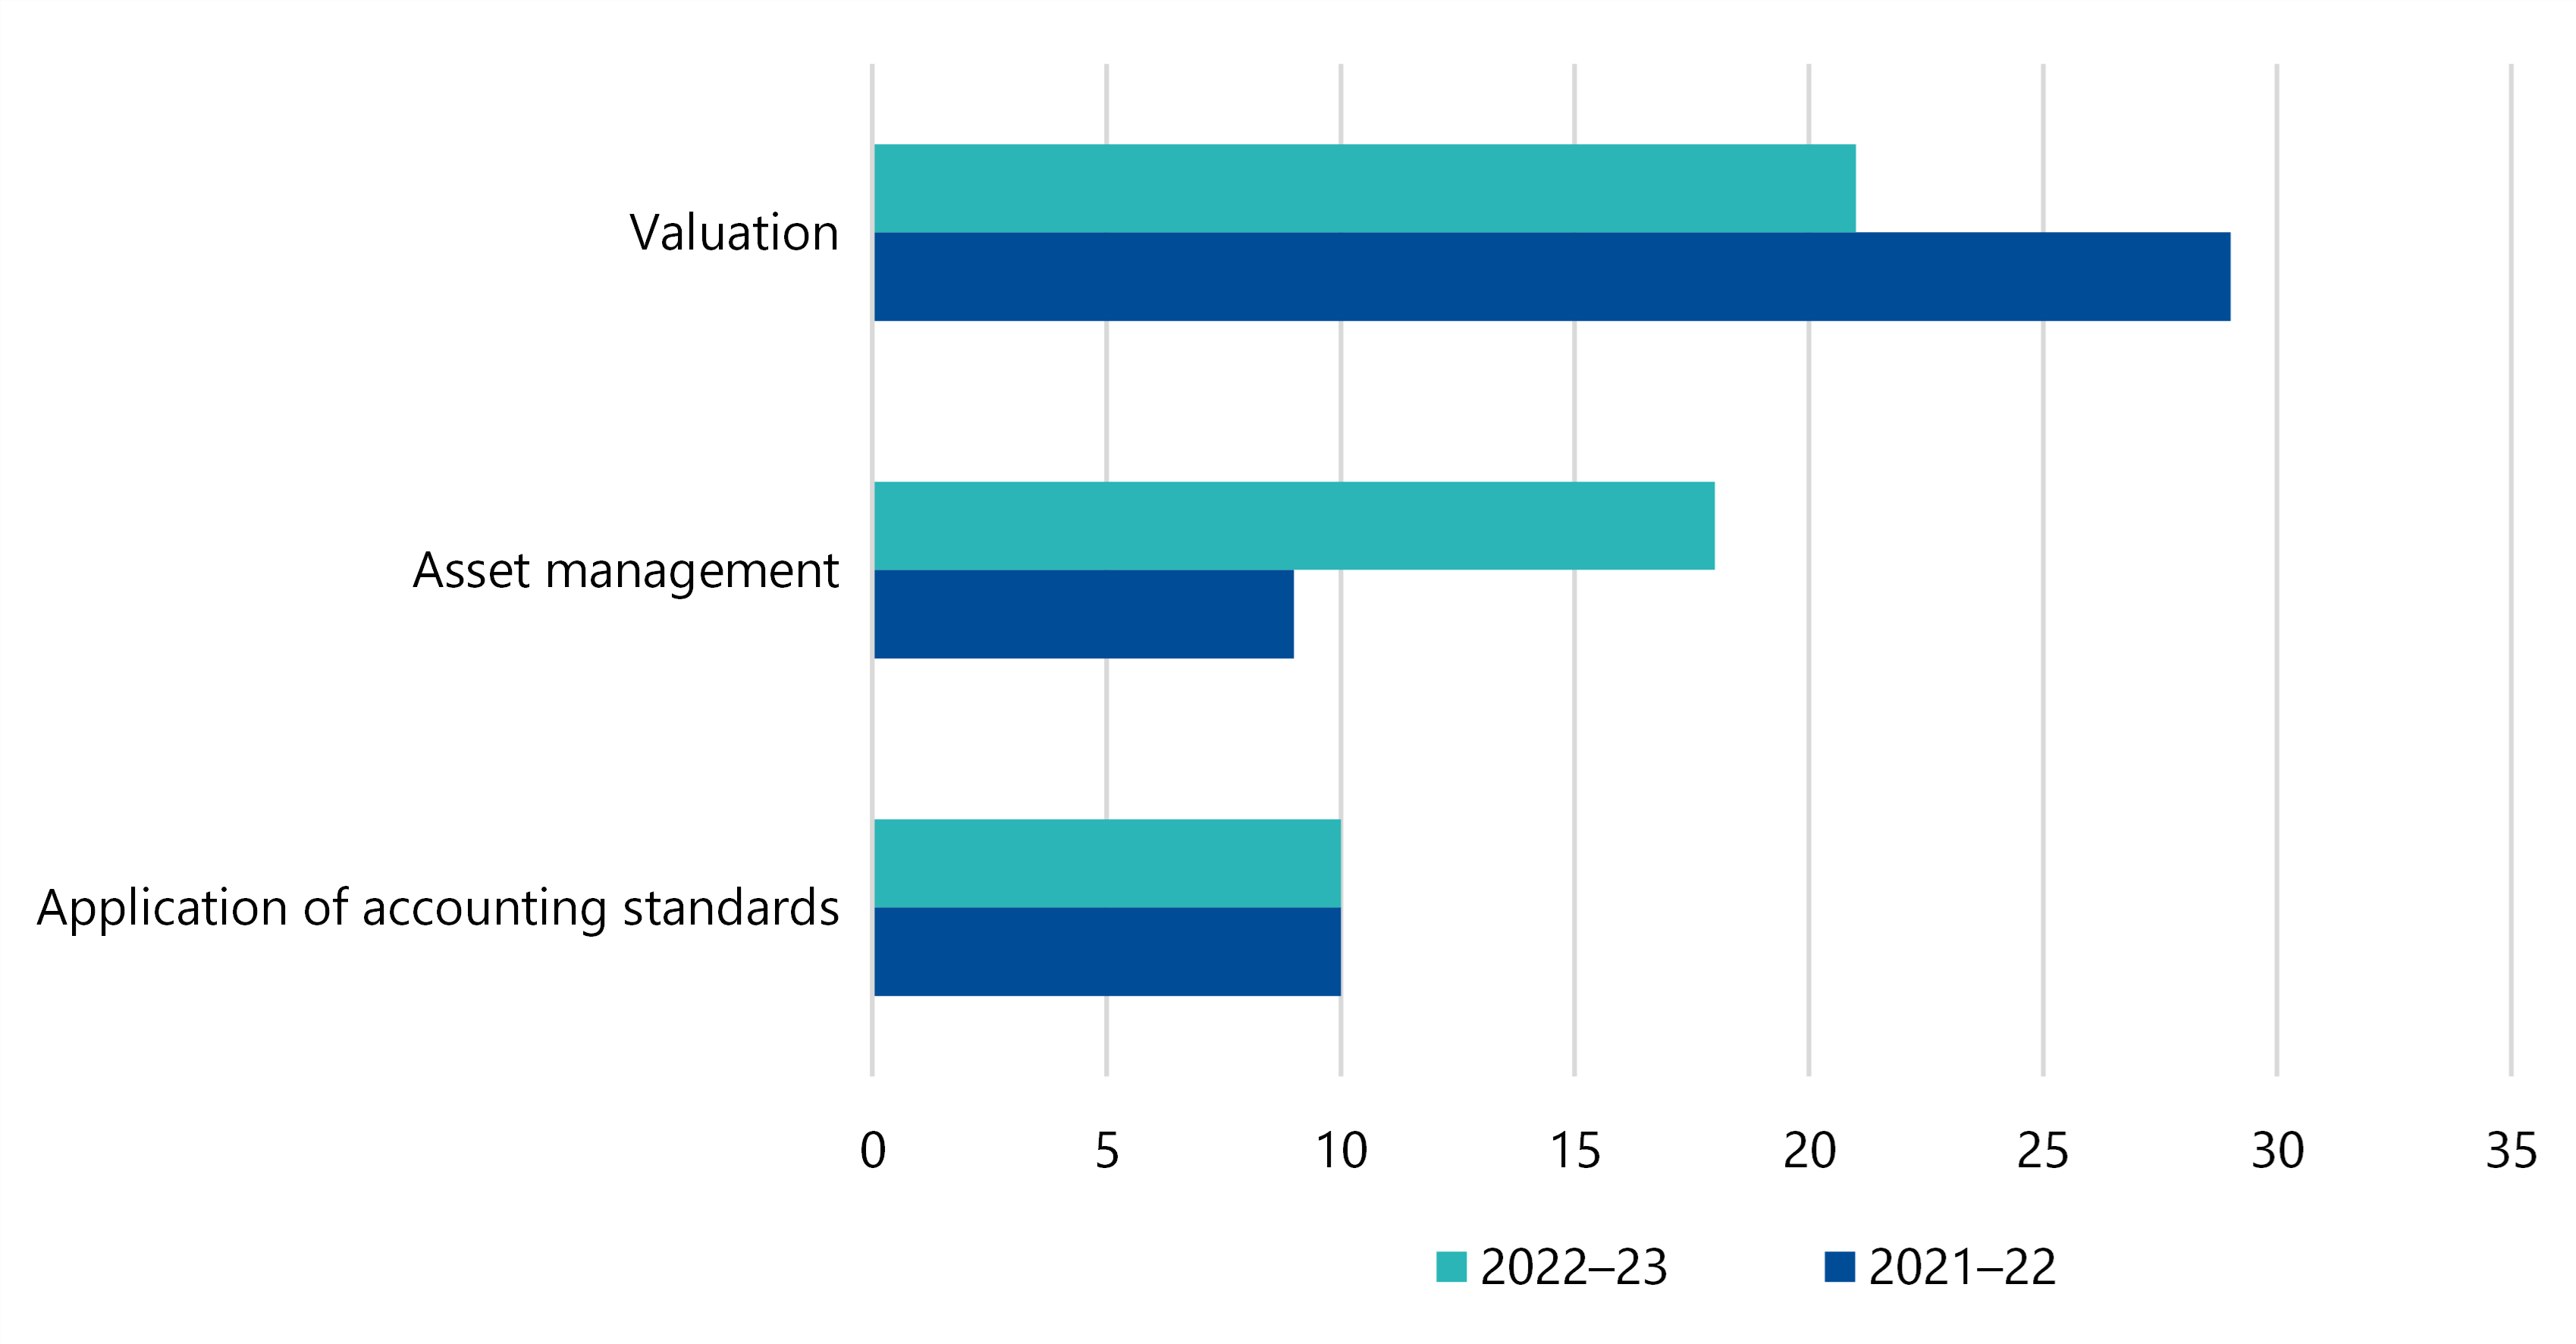 Figure 25 is a combo bar graph showing that, among medium and high-risk PIPE findings in 201–22, 29 were valuation issues, 9 were asset management issues and 10 were to do with the application of accounting standards. In 2022–23, 21 were valuation issues, 18 were about asset management and 10 were about the application of accounting standards.